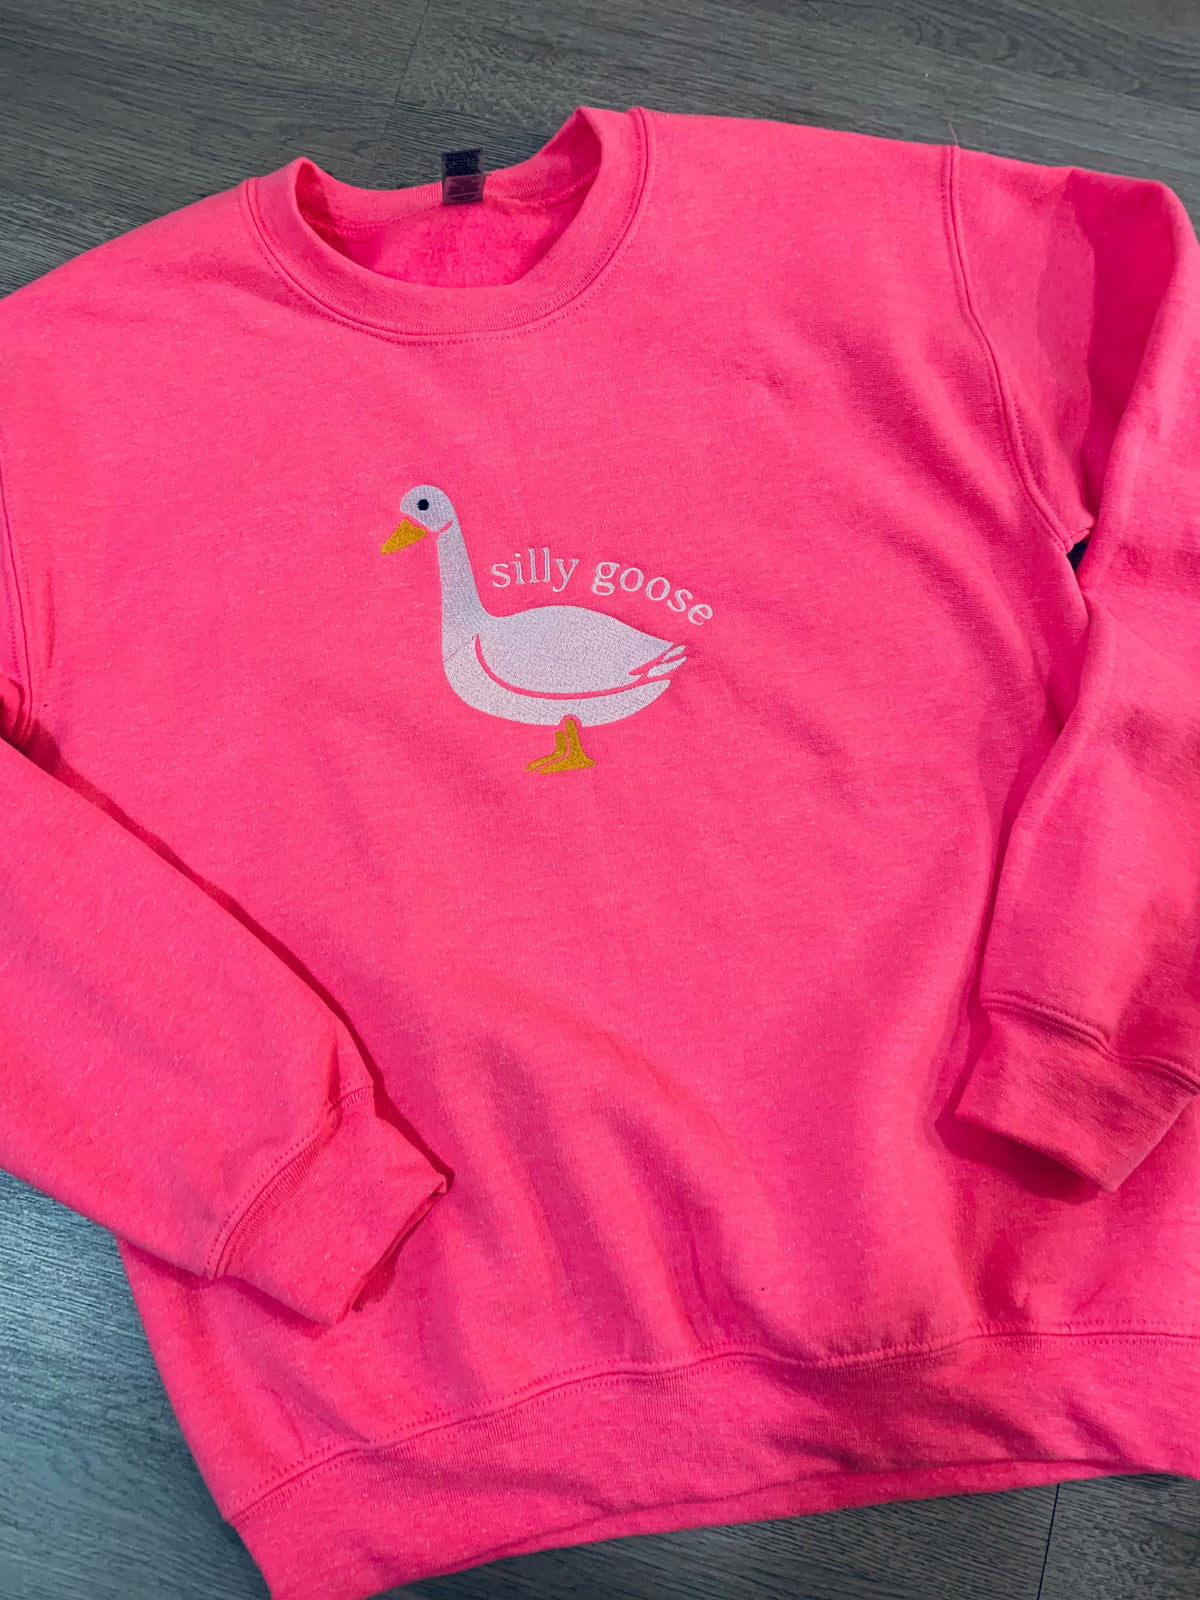 Silly Goose Sweatshirt-Sweatshirt-Peachy Keen Boutique-Peachy Keen Boutique, Women's Fashion Boutique, Located in Cape Girardeau and Dexter, MO